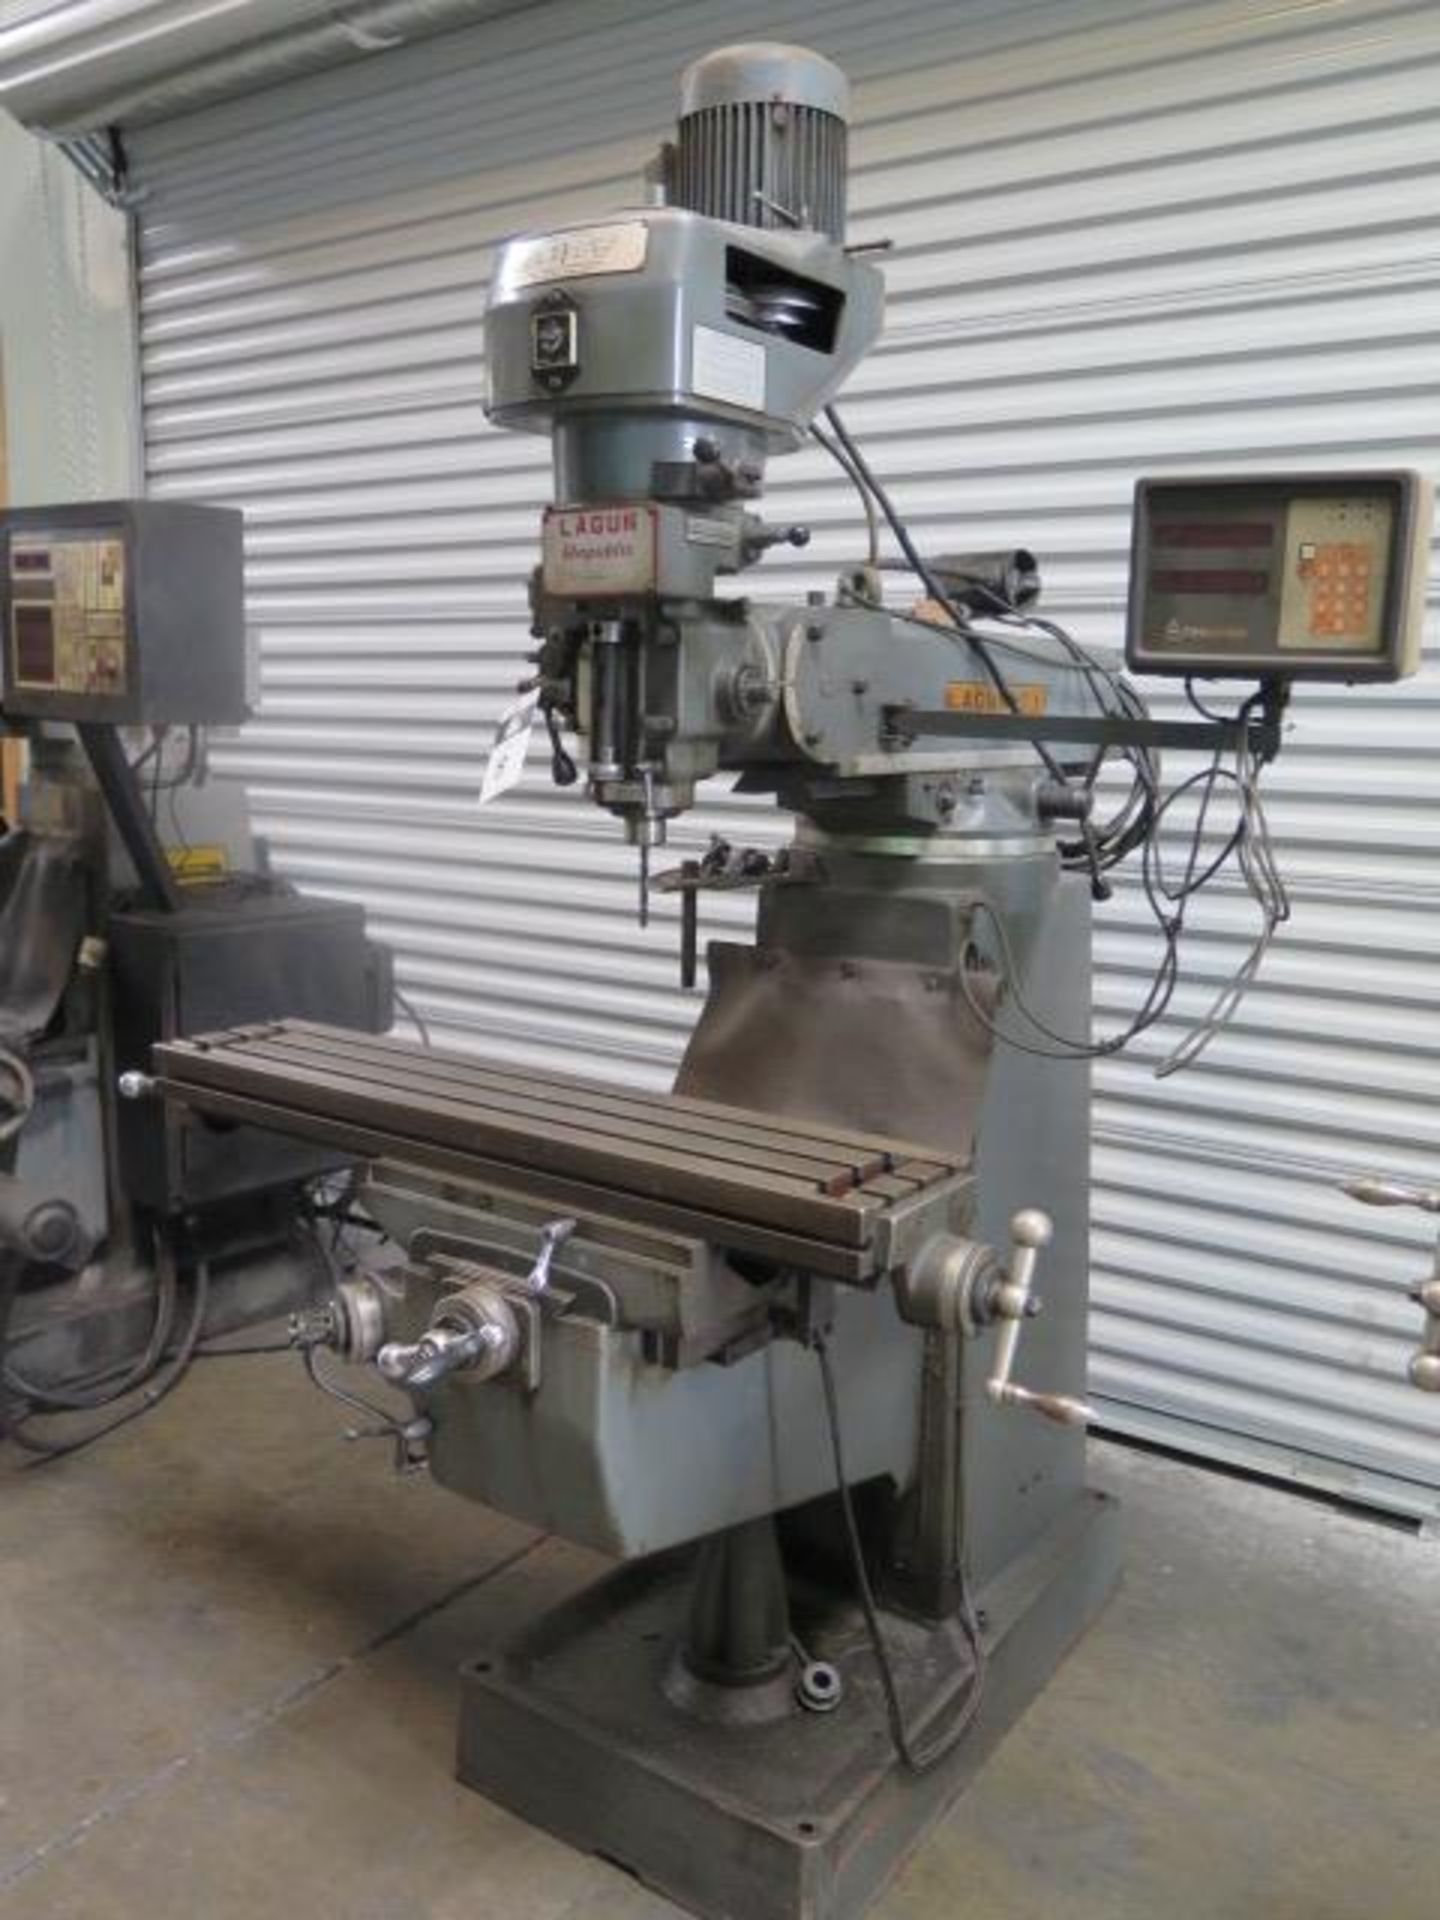 Lagun FT-1 Vertical Mill w/ Anilam Wizard DRO, 55-2940 RPM, 8-Speeds, 9” x 42” Table SOLD AS-IS - Image 2 of 9